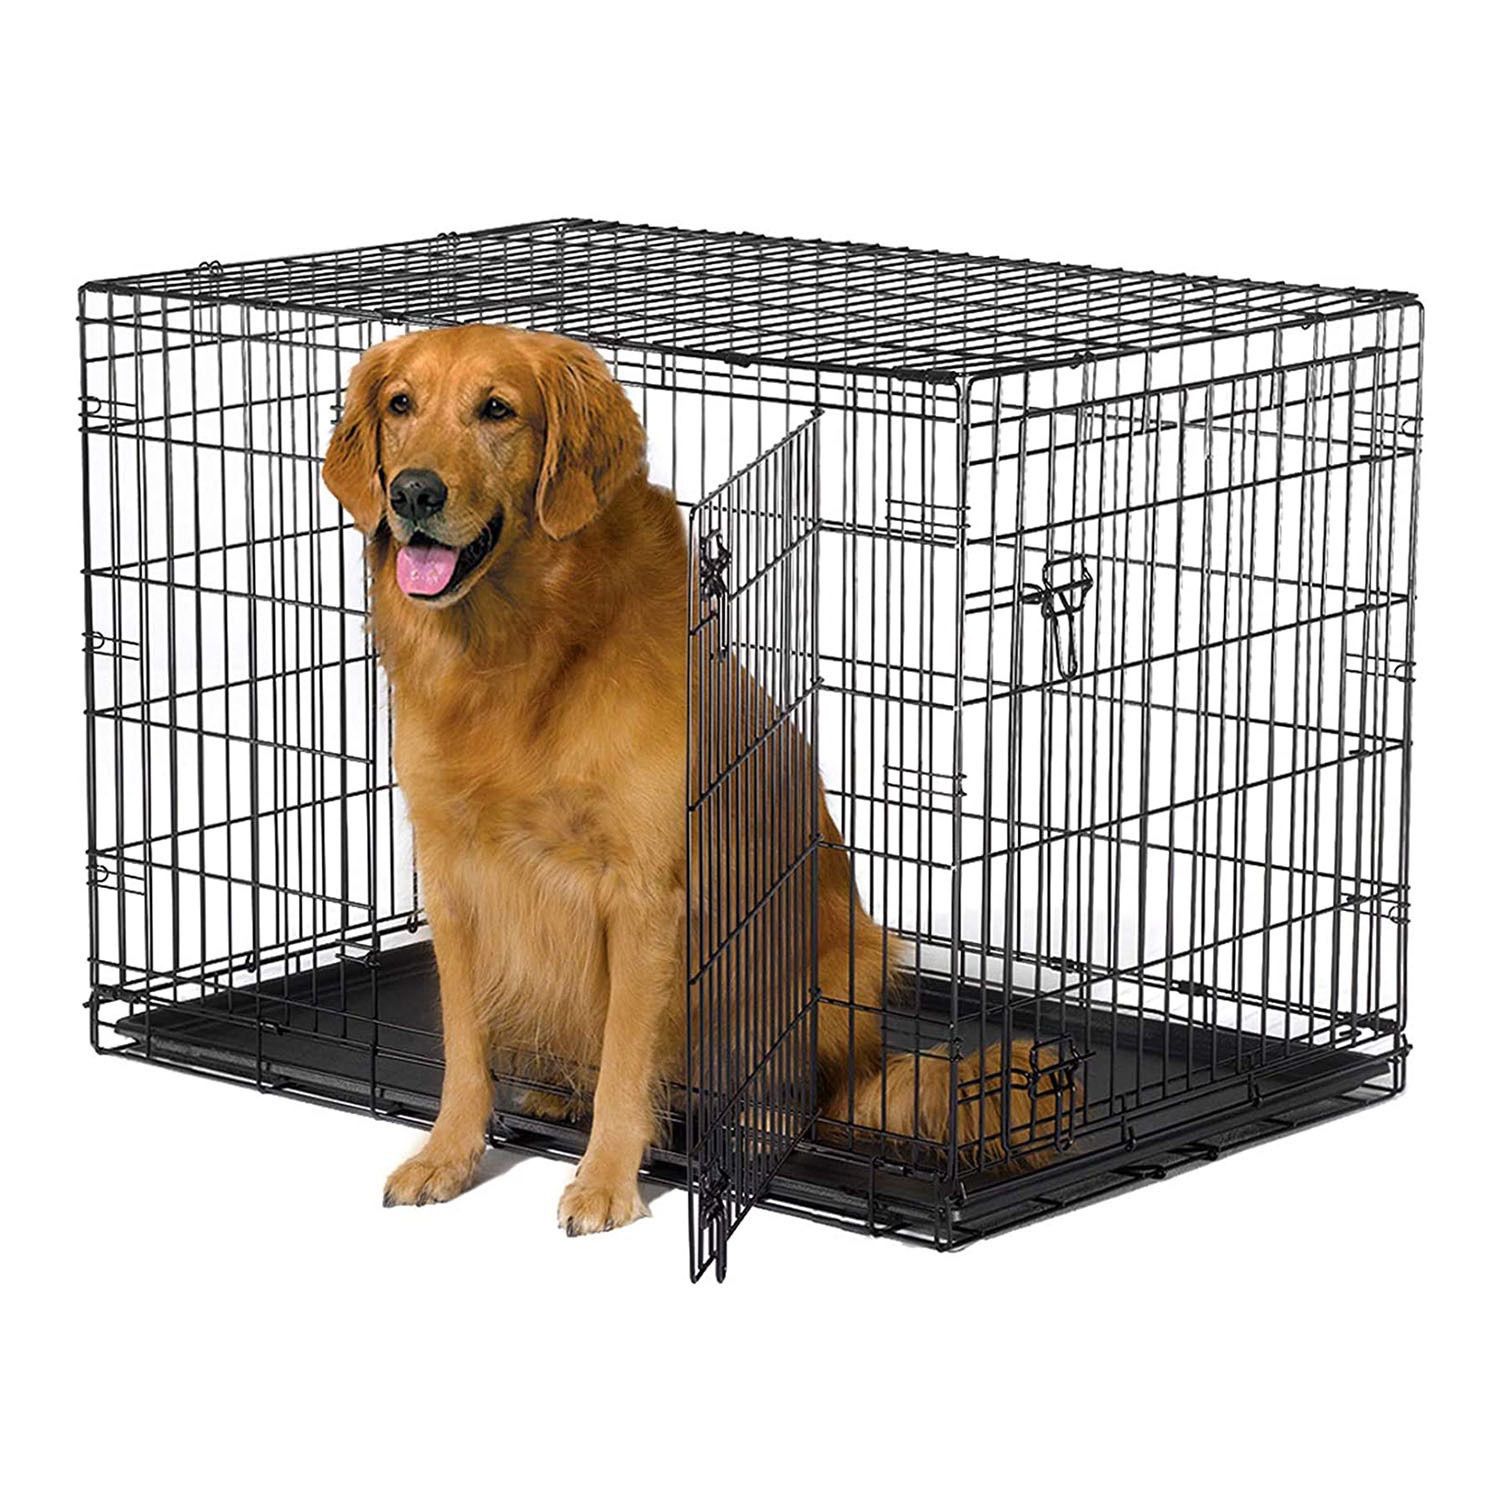 Godohome 42 Inches Dog Crate X-Large Collapsible Dog Crate Wire Pet Dog Crate with Double Doors Leak Proof Plastic Tray Divider Outdoor Indoor Portabl